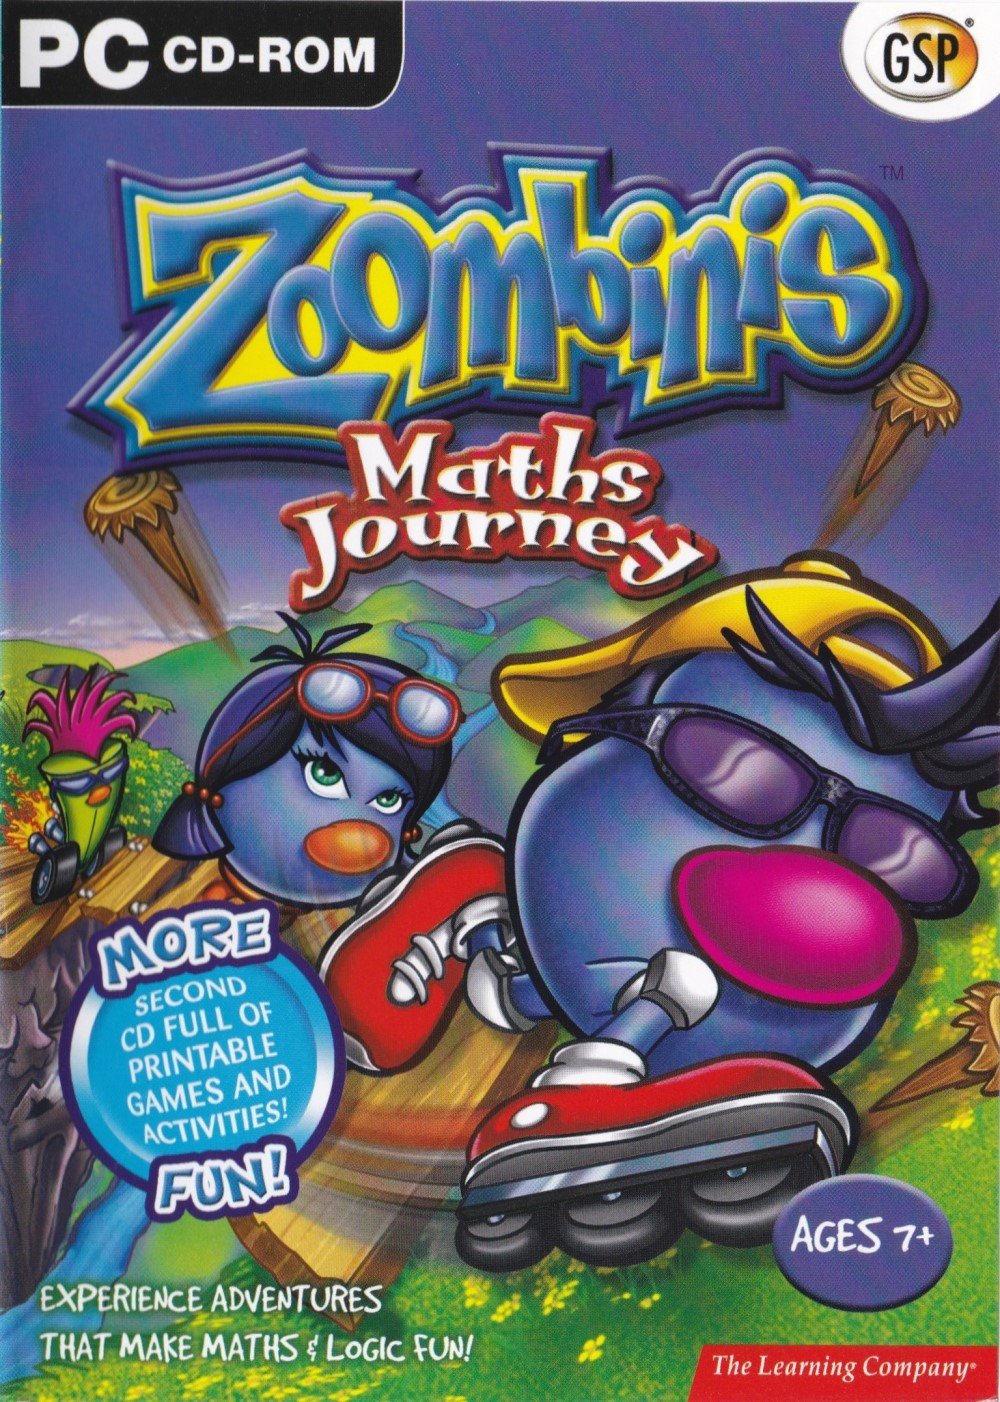 zoombinis logical journey